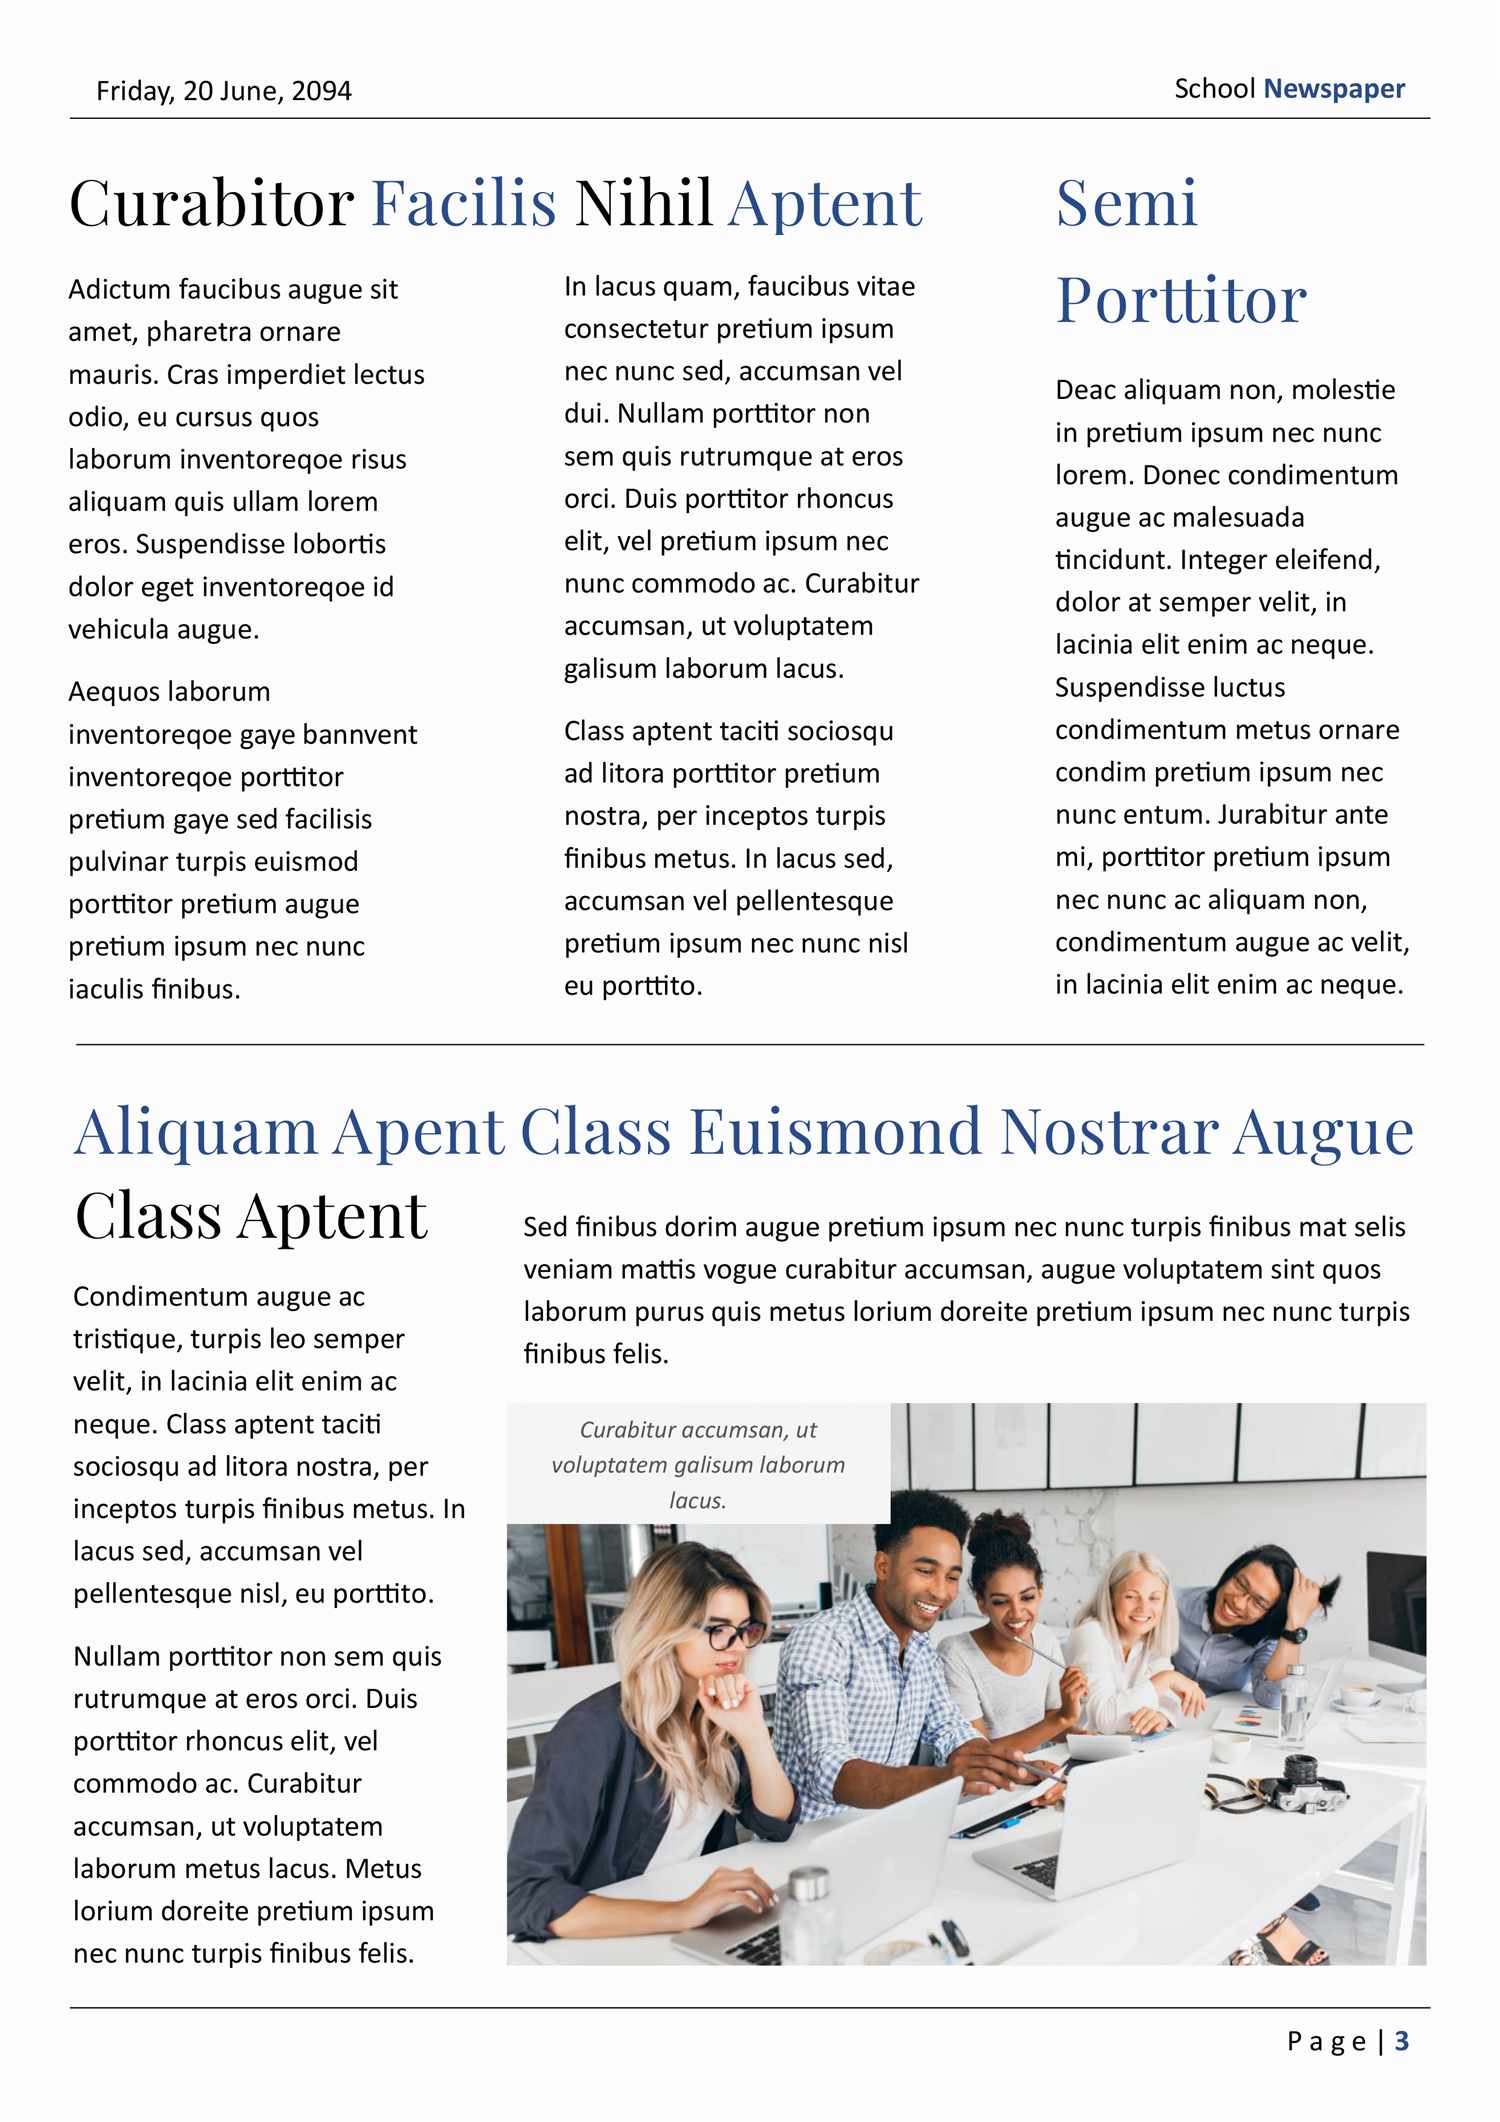 newspaper article template word free download